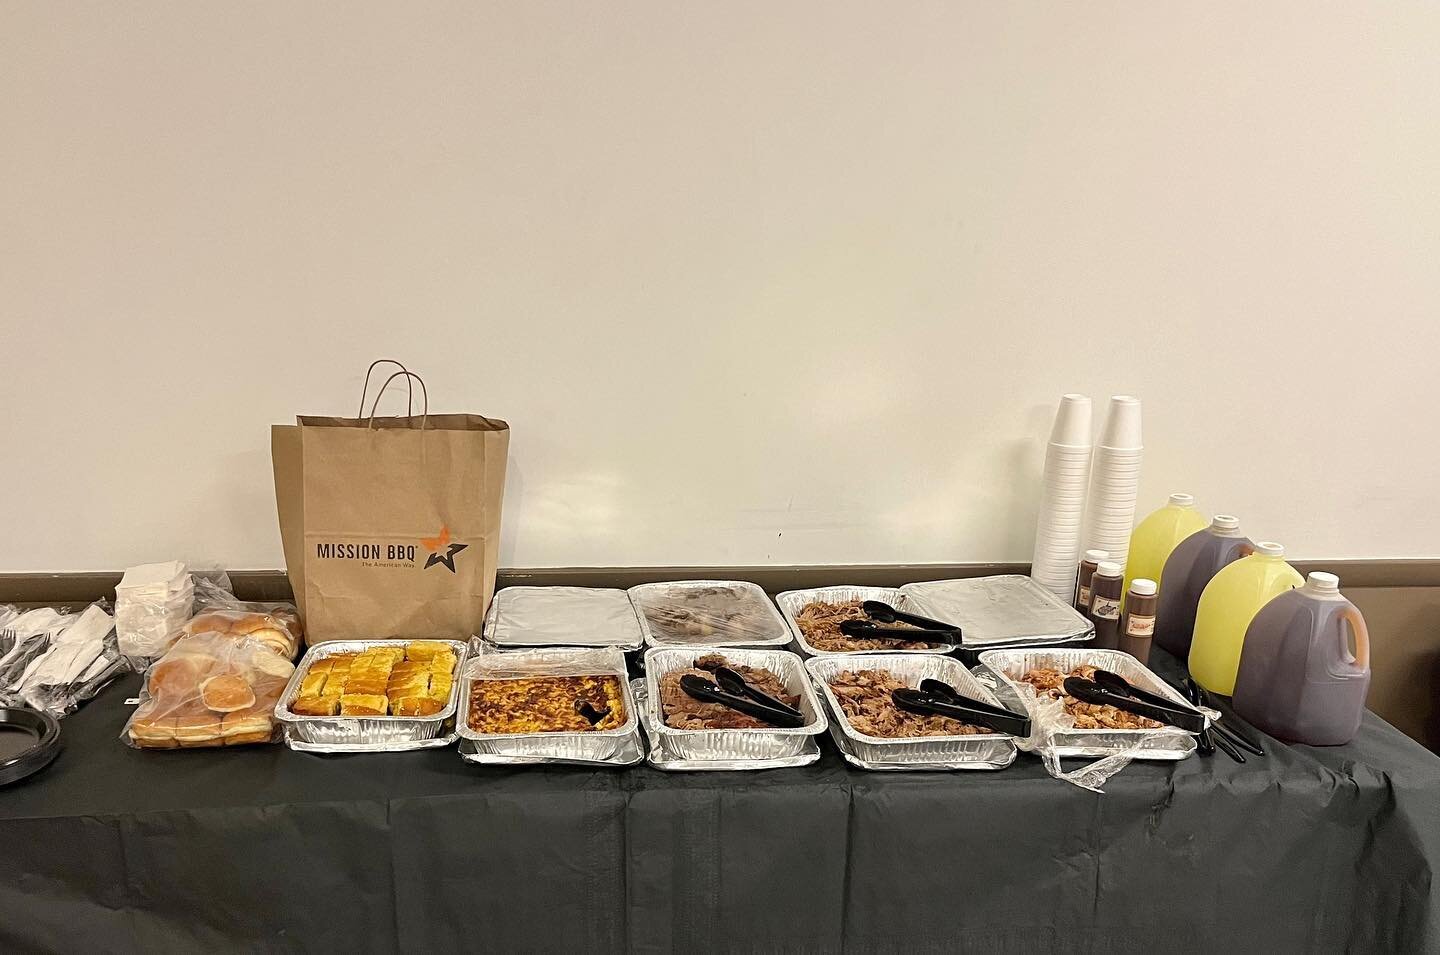 UDFD B Platoon members and todays command staff would like to send a heartfelt thank you to Manoa Fire Company - Station 56 and Chief 56 Mike Norman for providing the members with a catered dinner today from MISSION BBQ. Your generosity is greatly ap